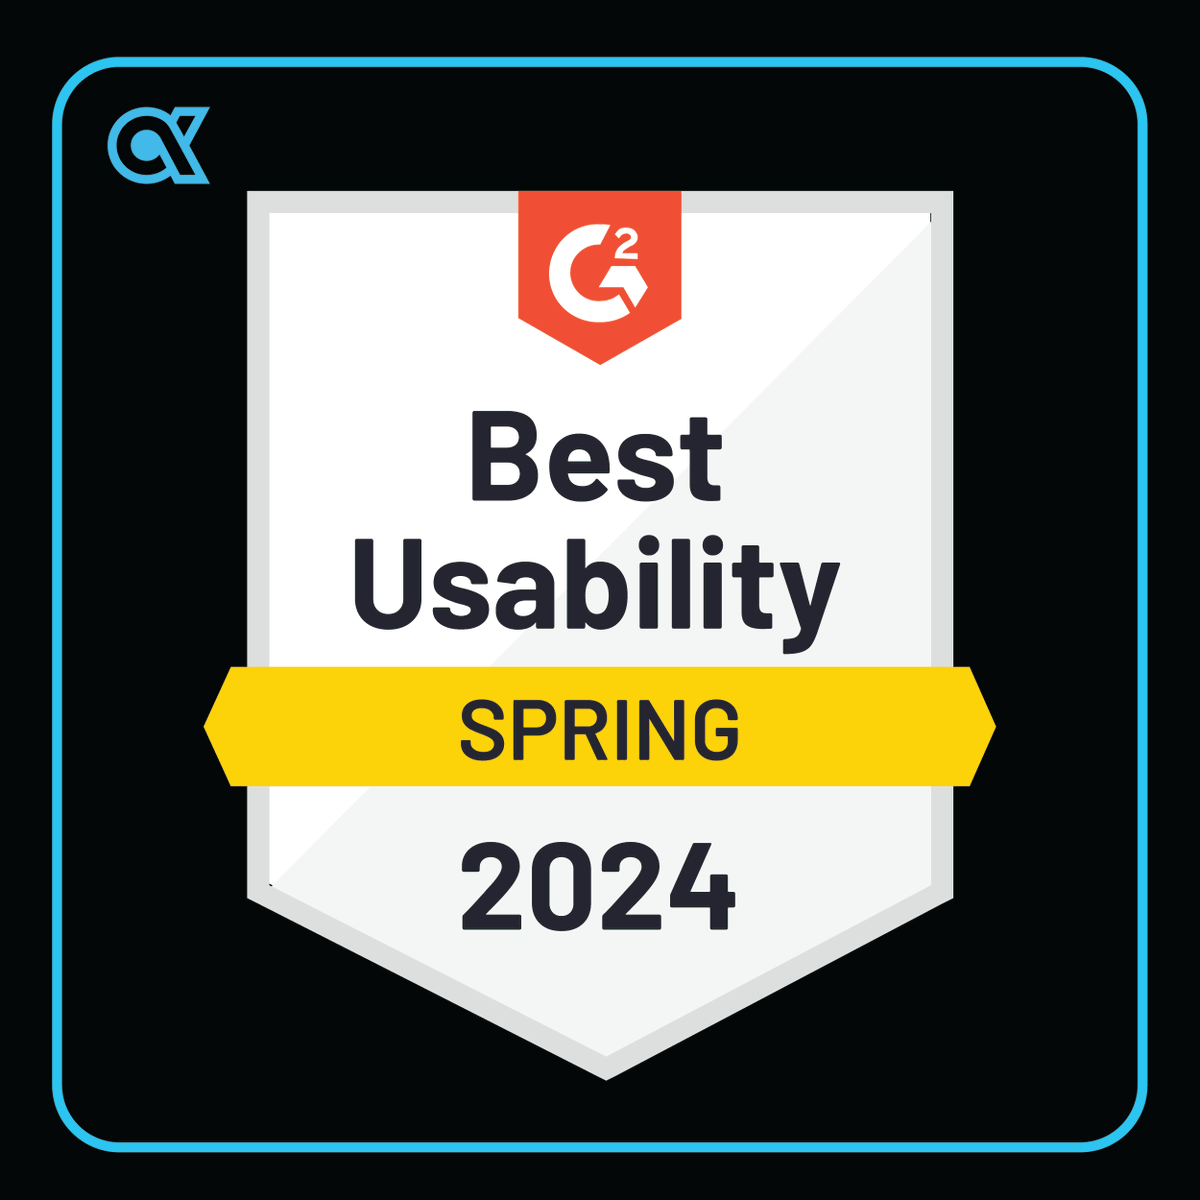 We're pleased to have been awarded Best Usability by G2! G2 is a software comparison platform that helps users find the best software solutions and has named Awardco a category leader. We are committed to excellence and innovation in the industry! #awardco #employeerecognition